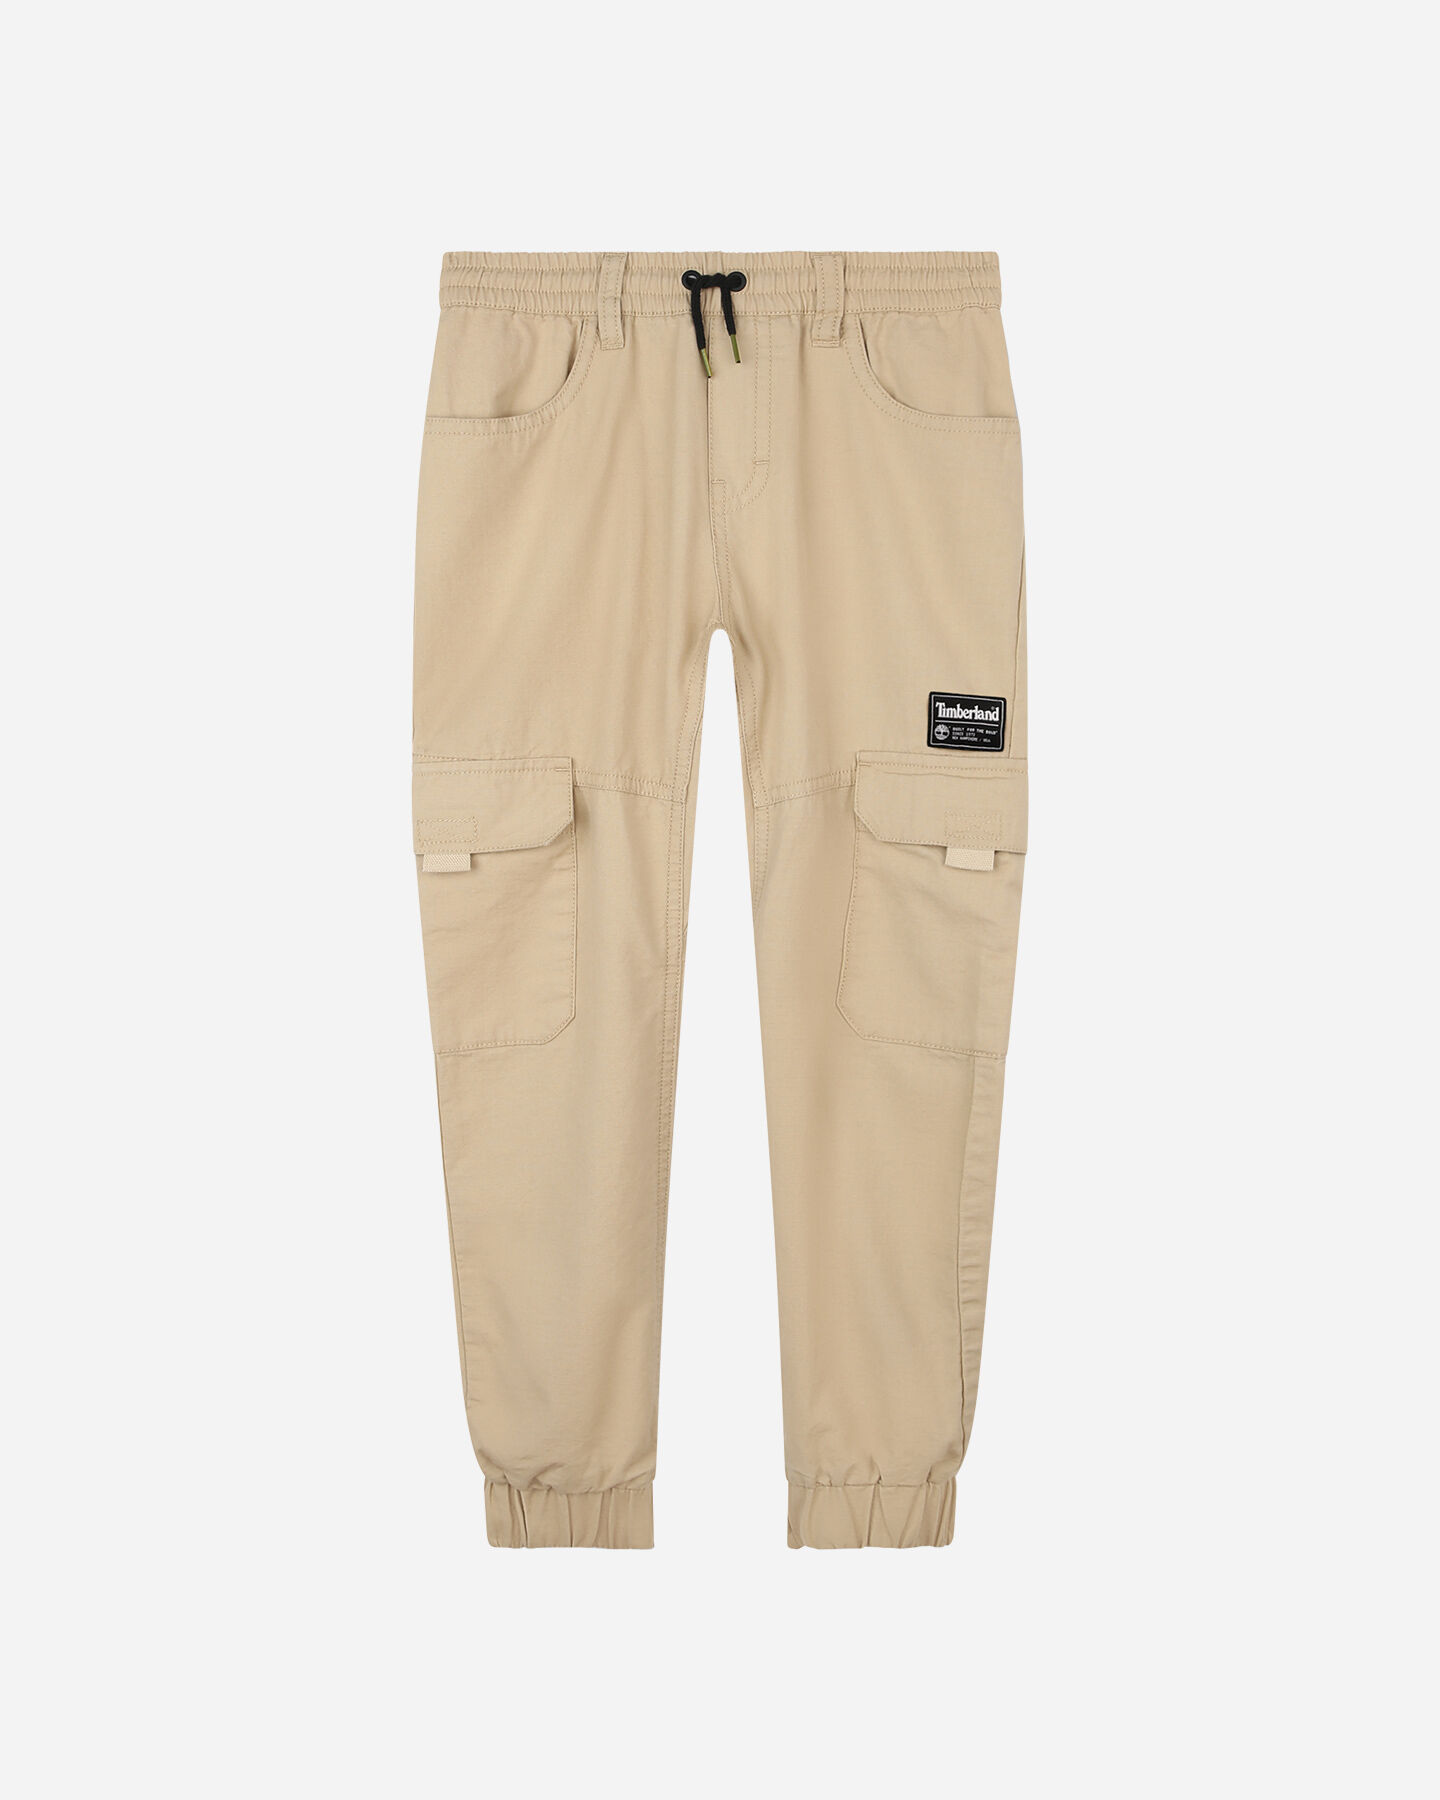  Pantalone TIMBERLAND CARGO JR S4131415|252|06A scatto 0